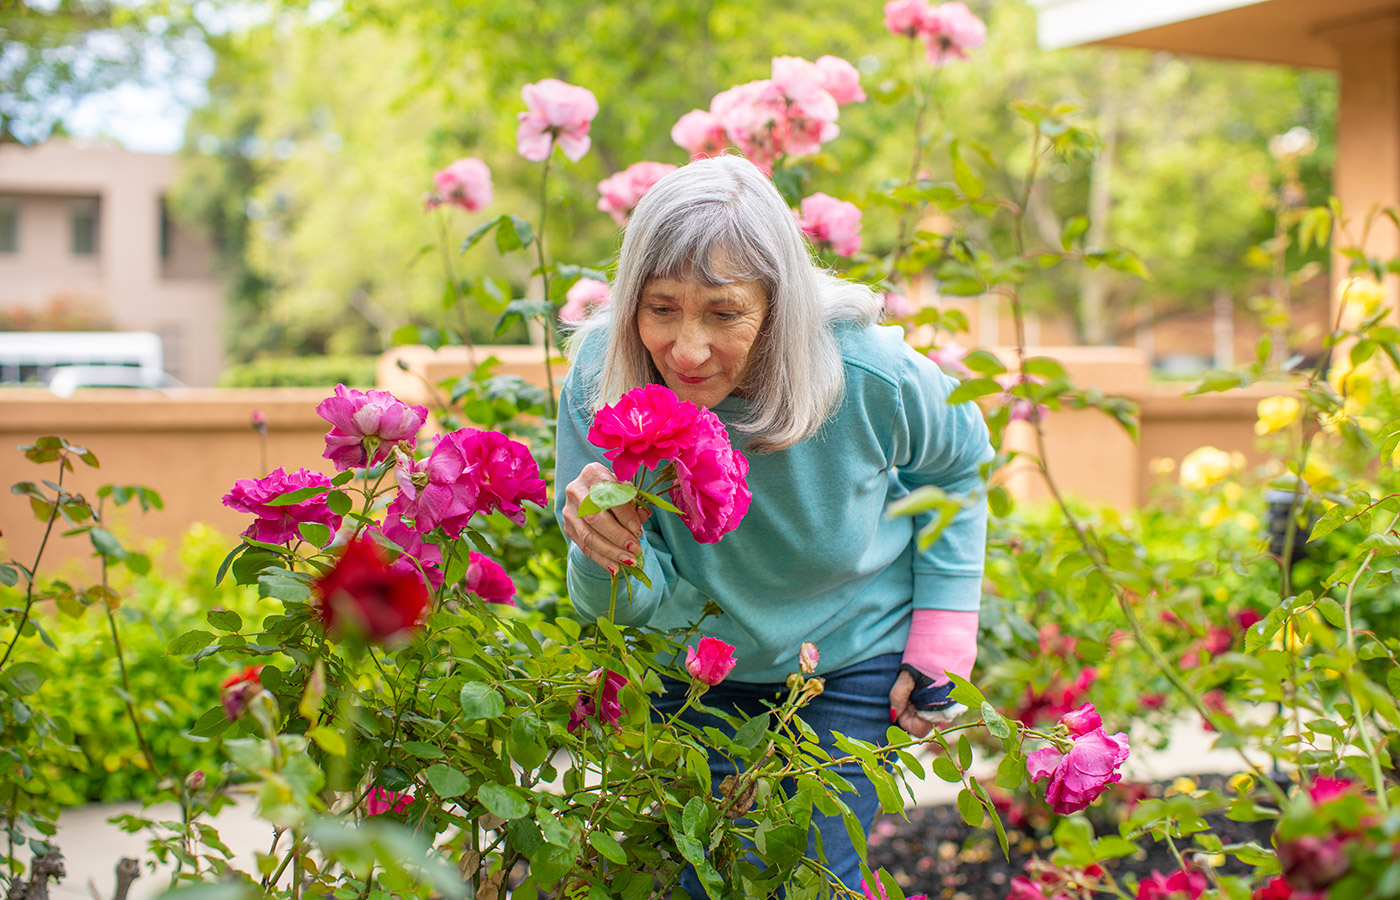 A resident is smelling pink roses in the garden.